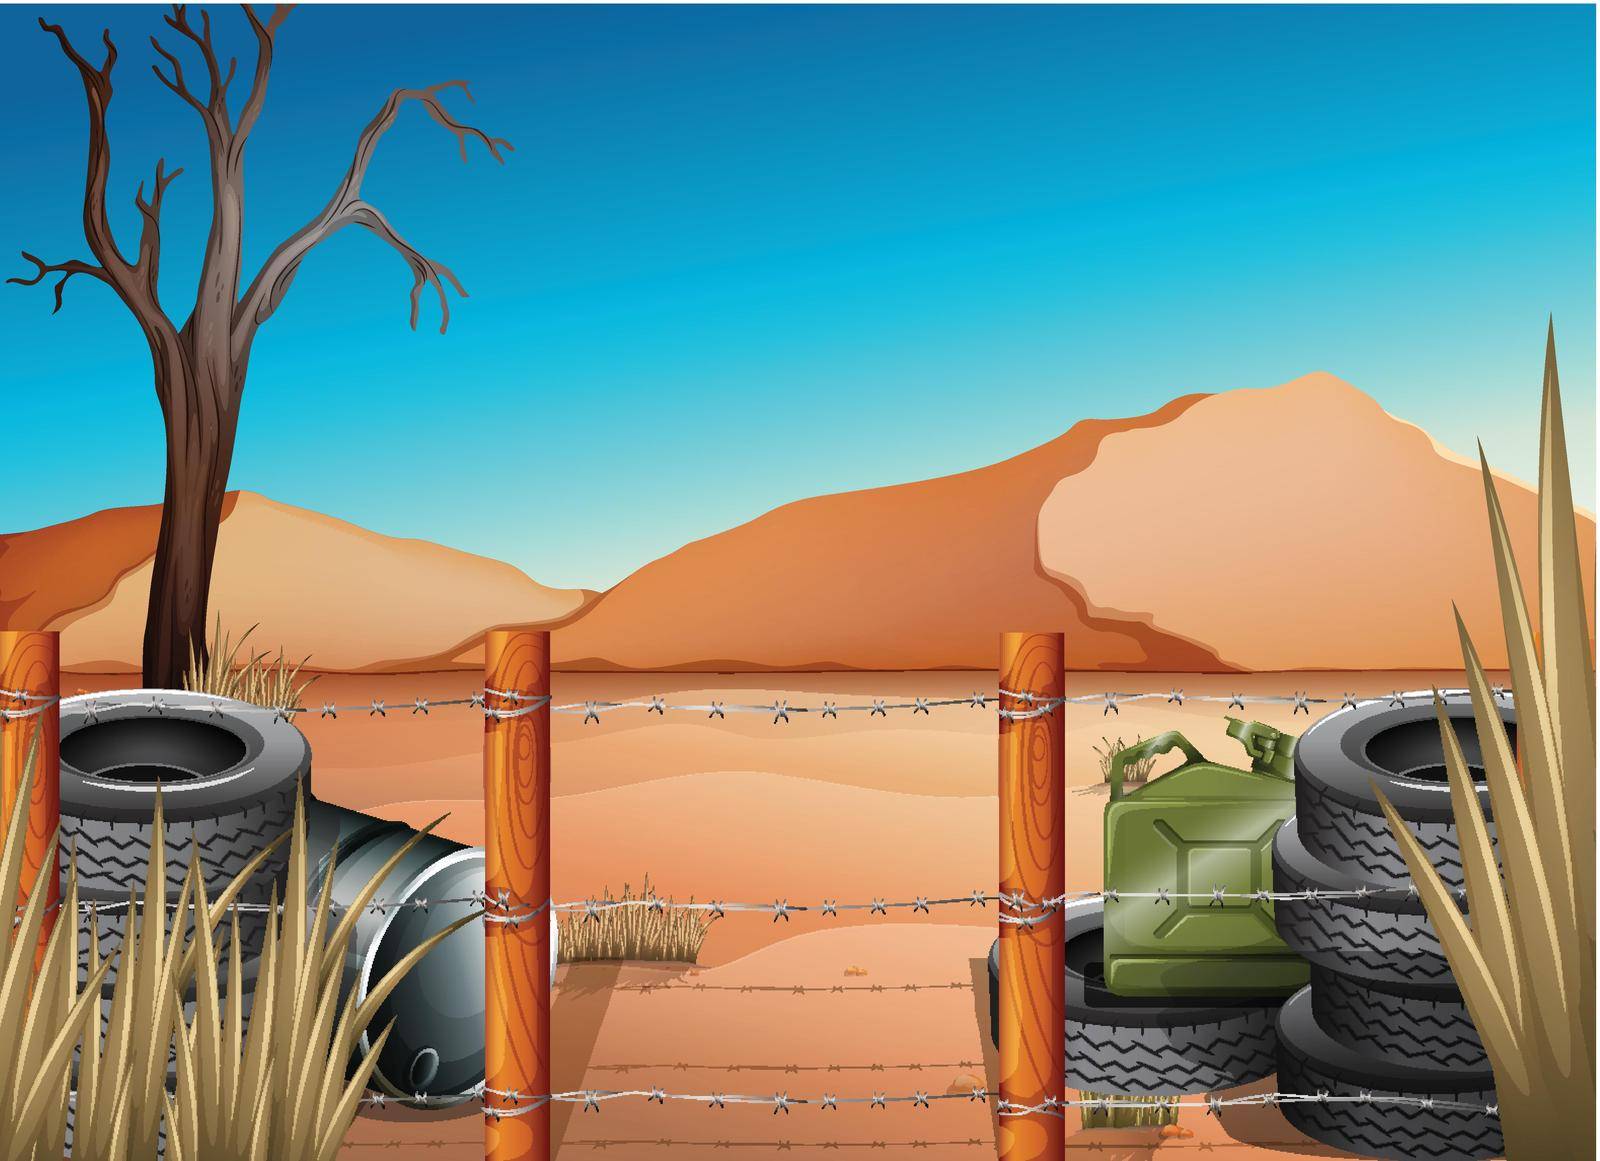 Illustration of a desert with tires and a barbwire fence